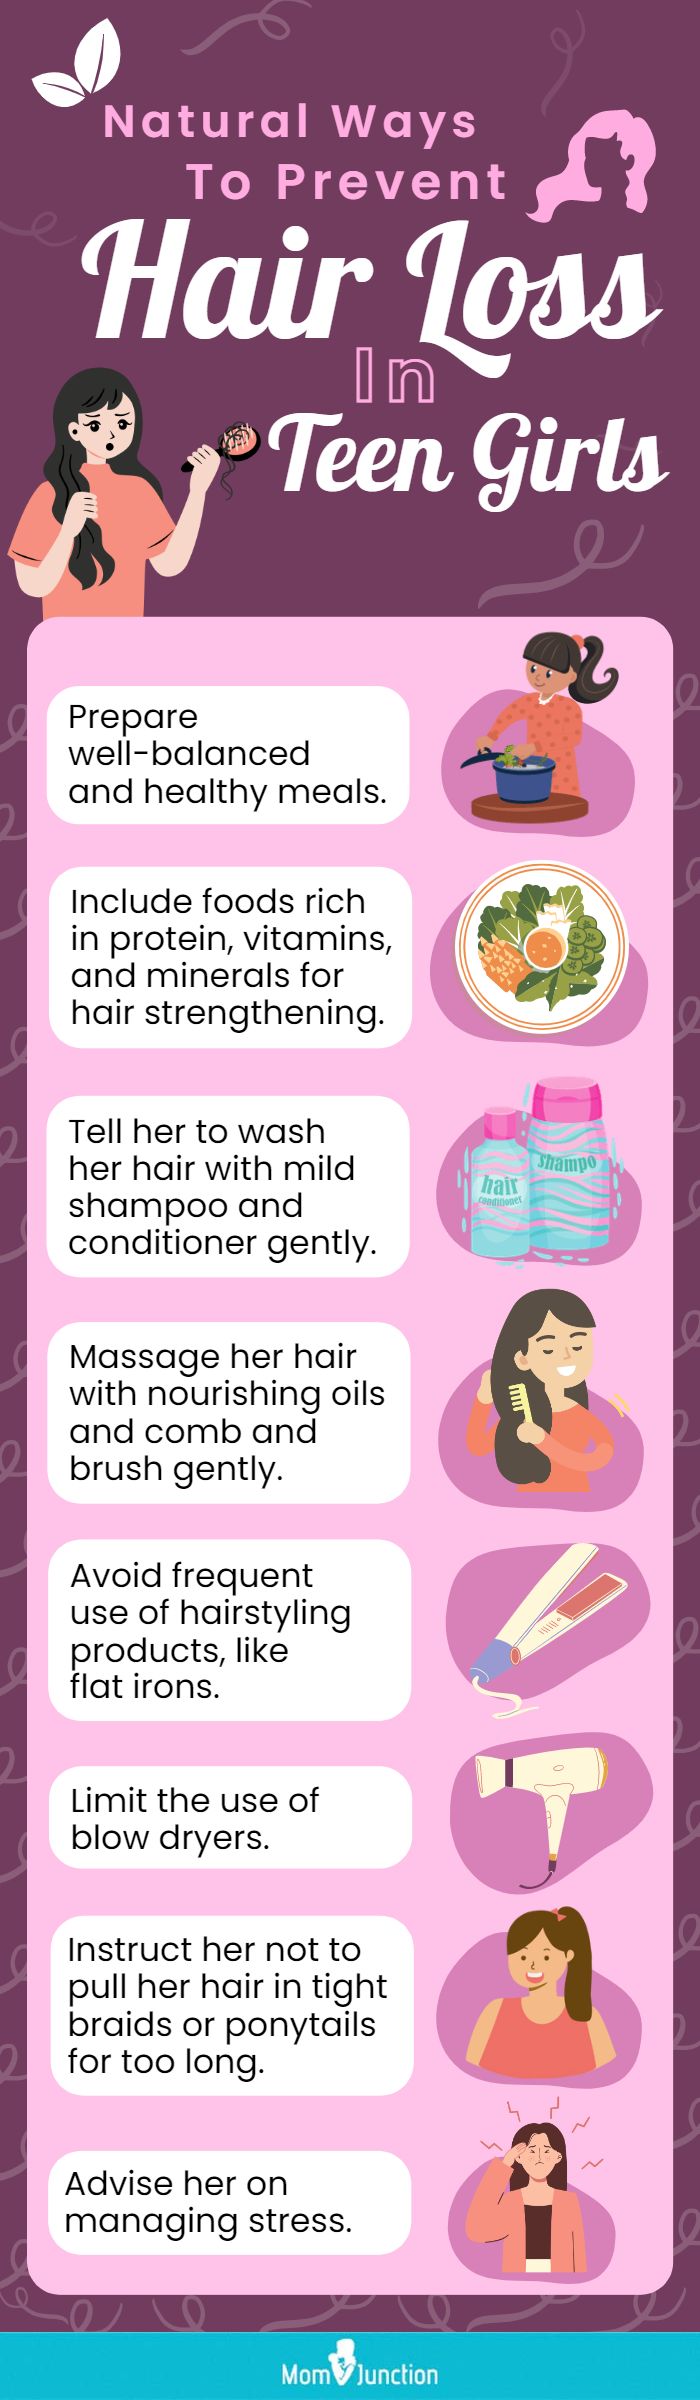 natural ways to prevent hair loss in teen girls [infographic]